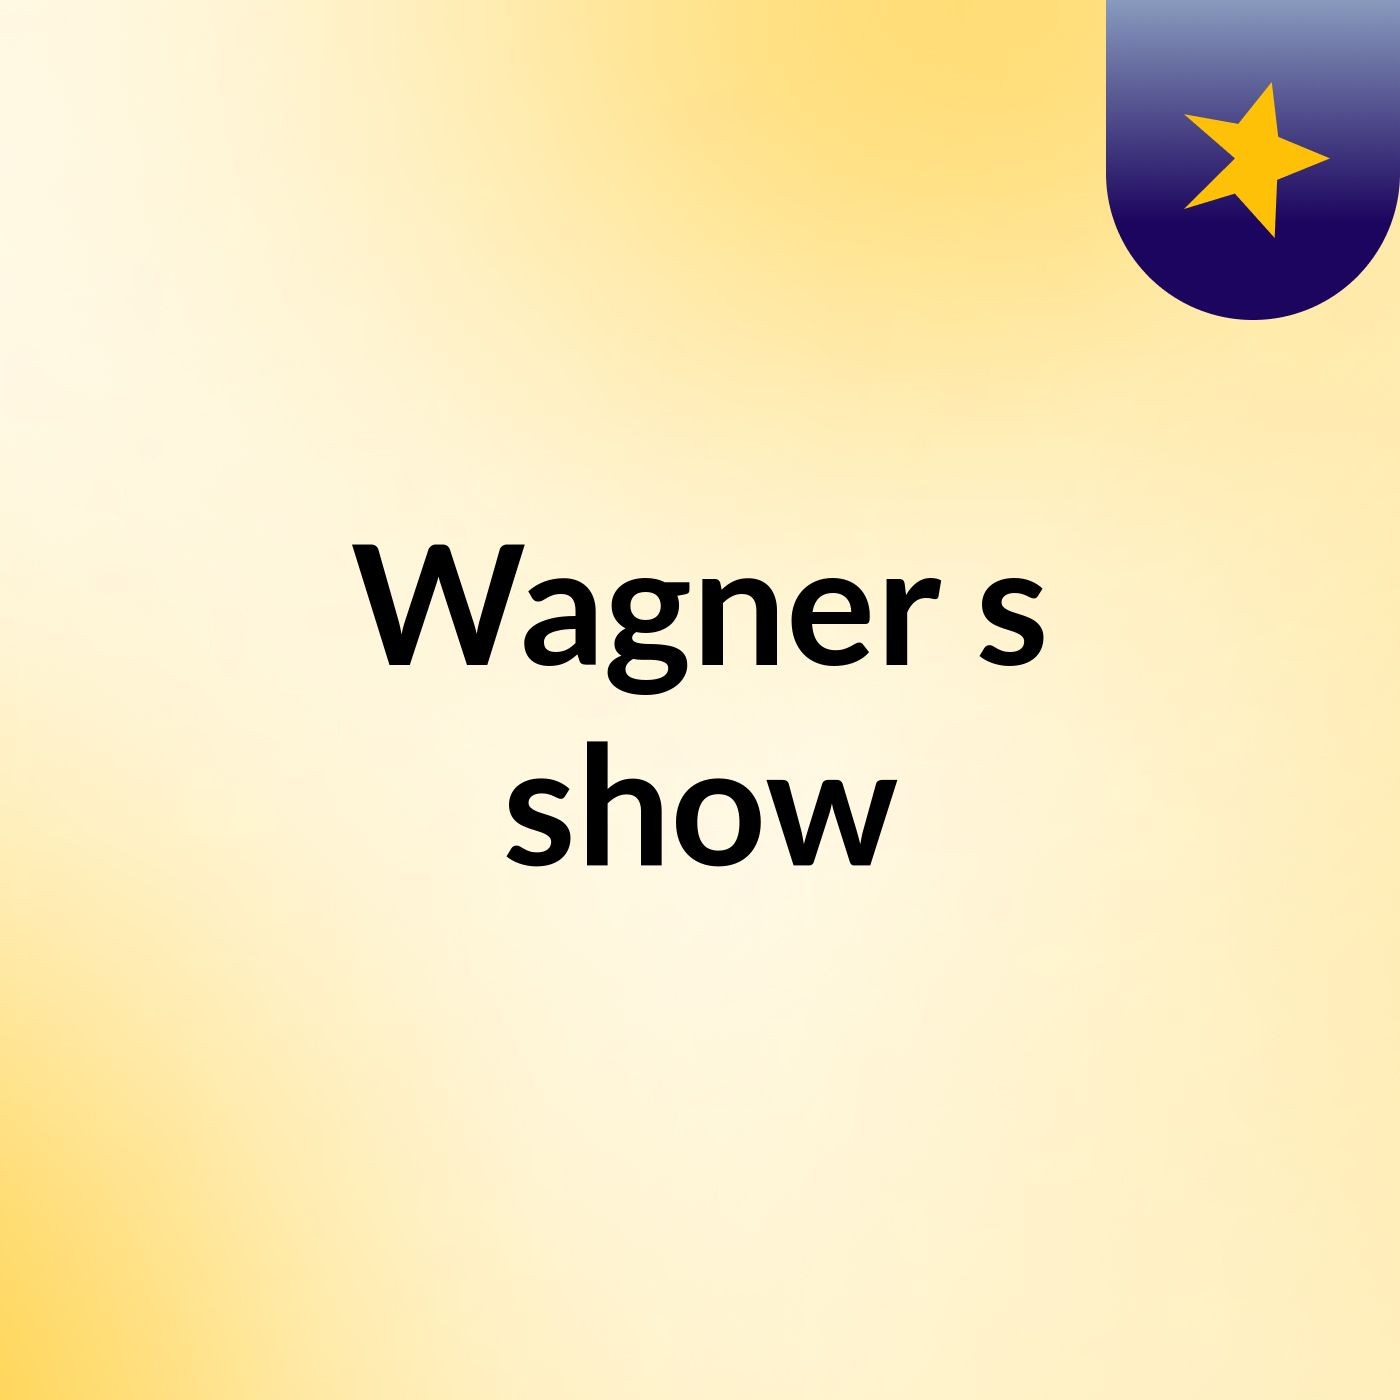 Wagner's show